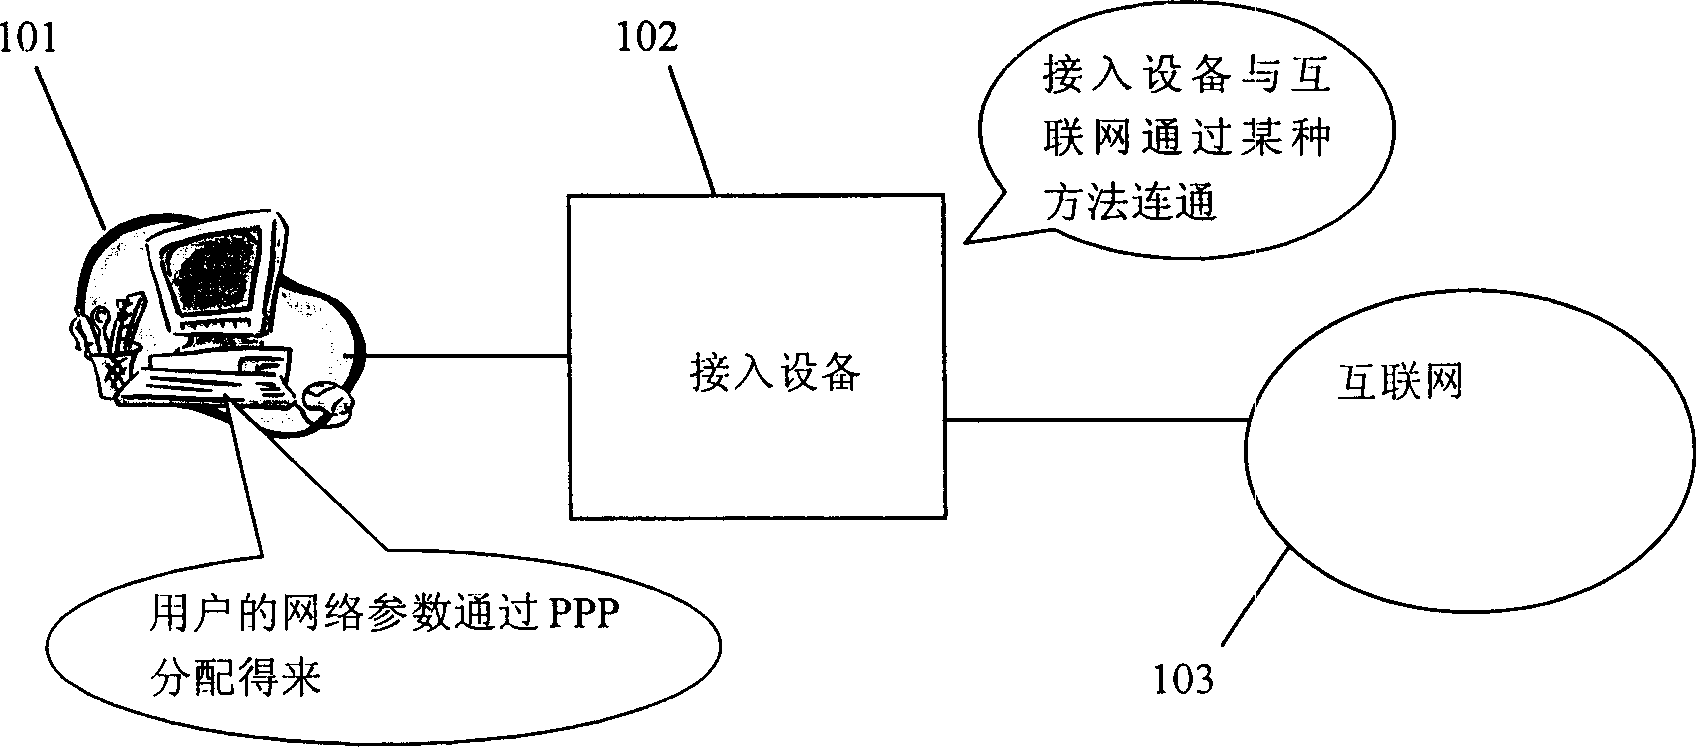 Method and device for connecting wide hand network user into Internet